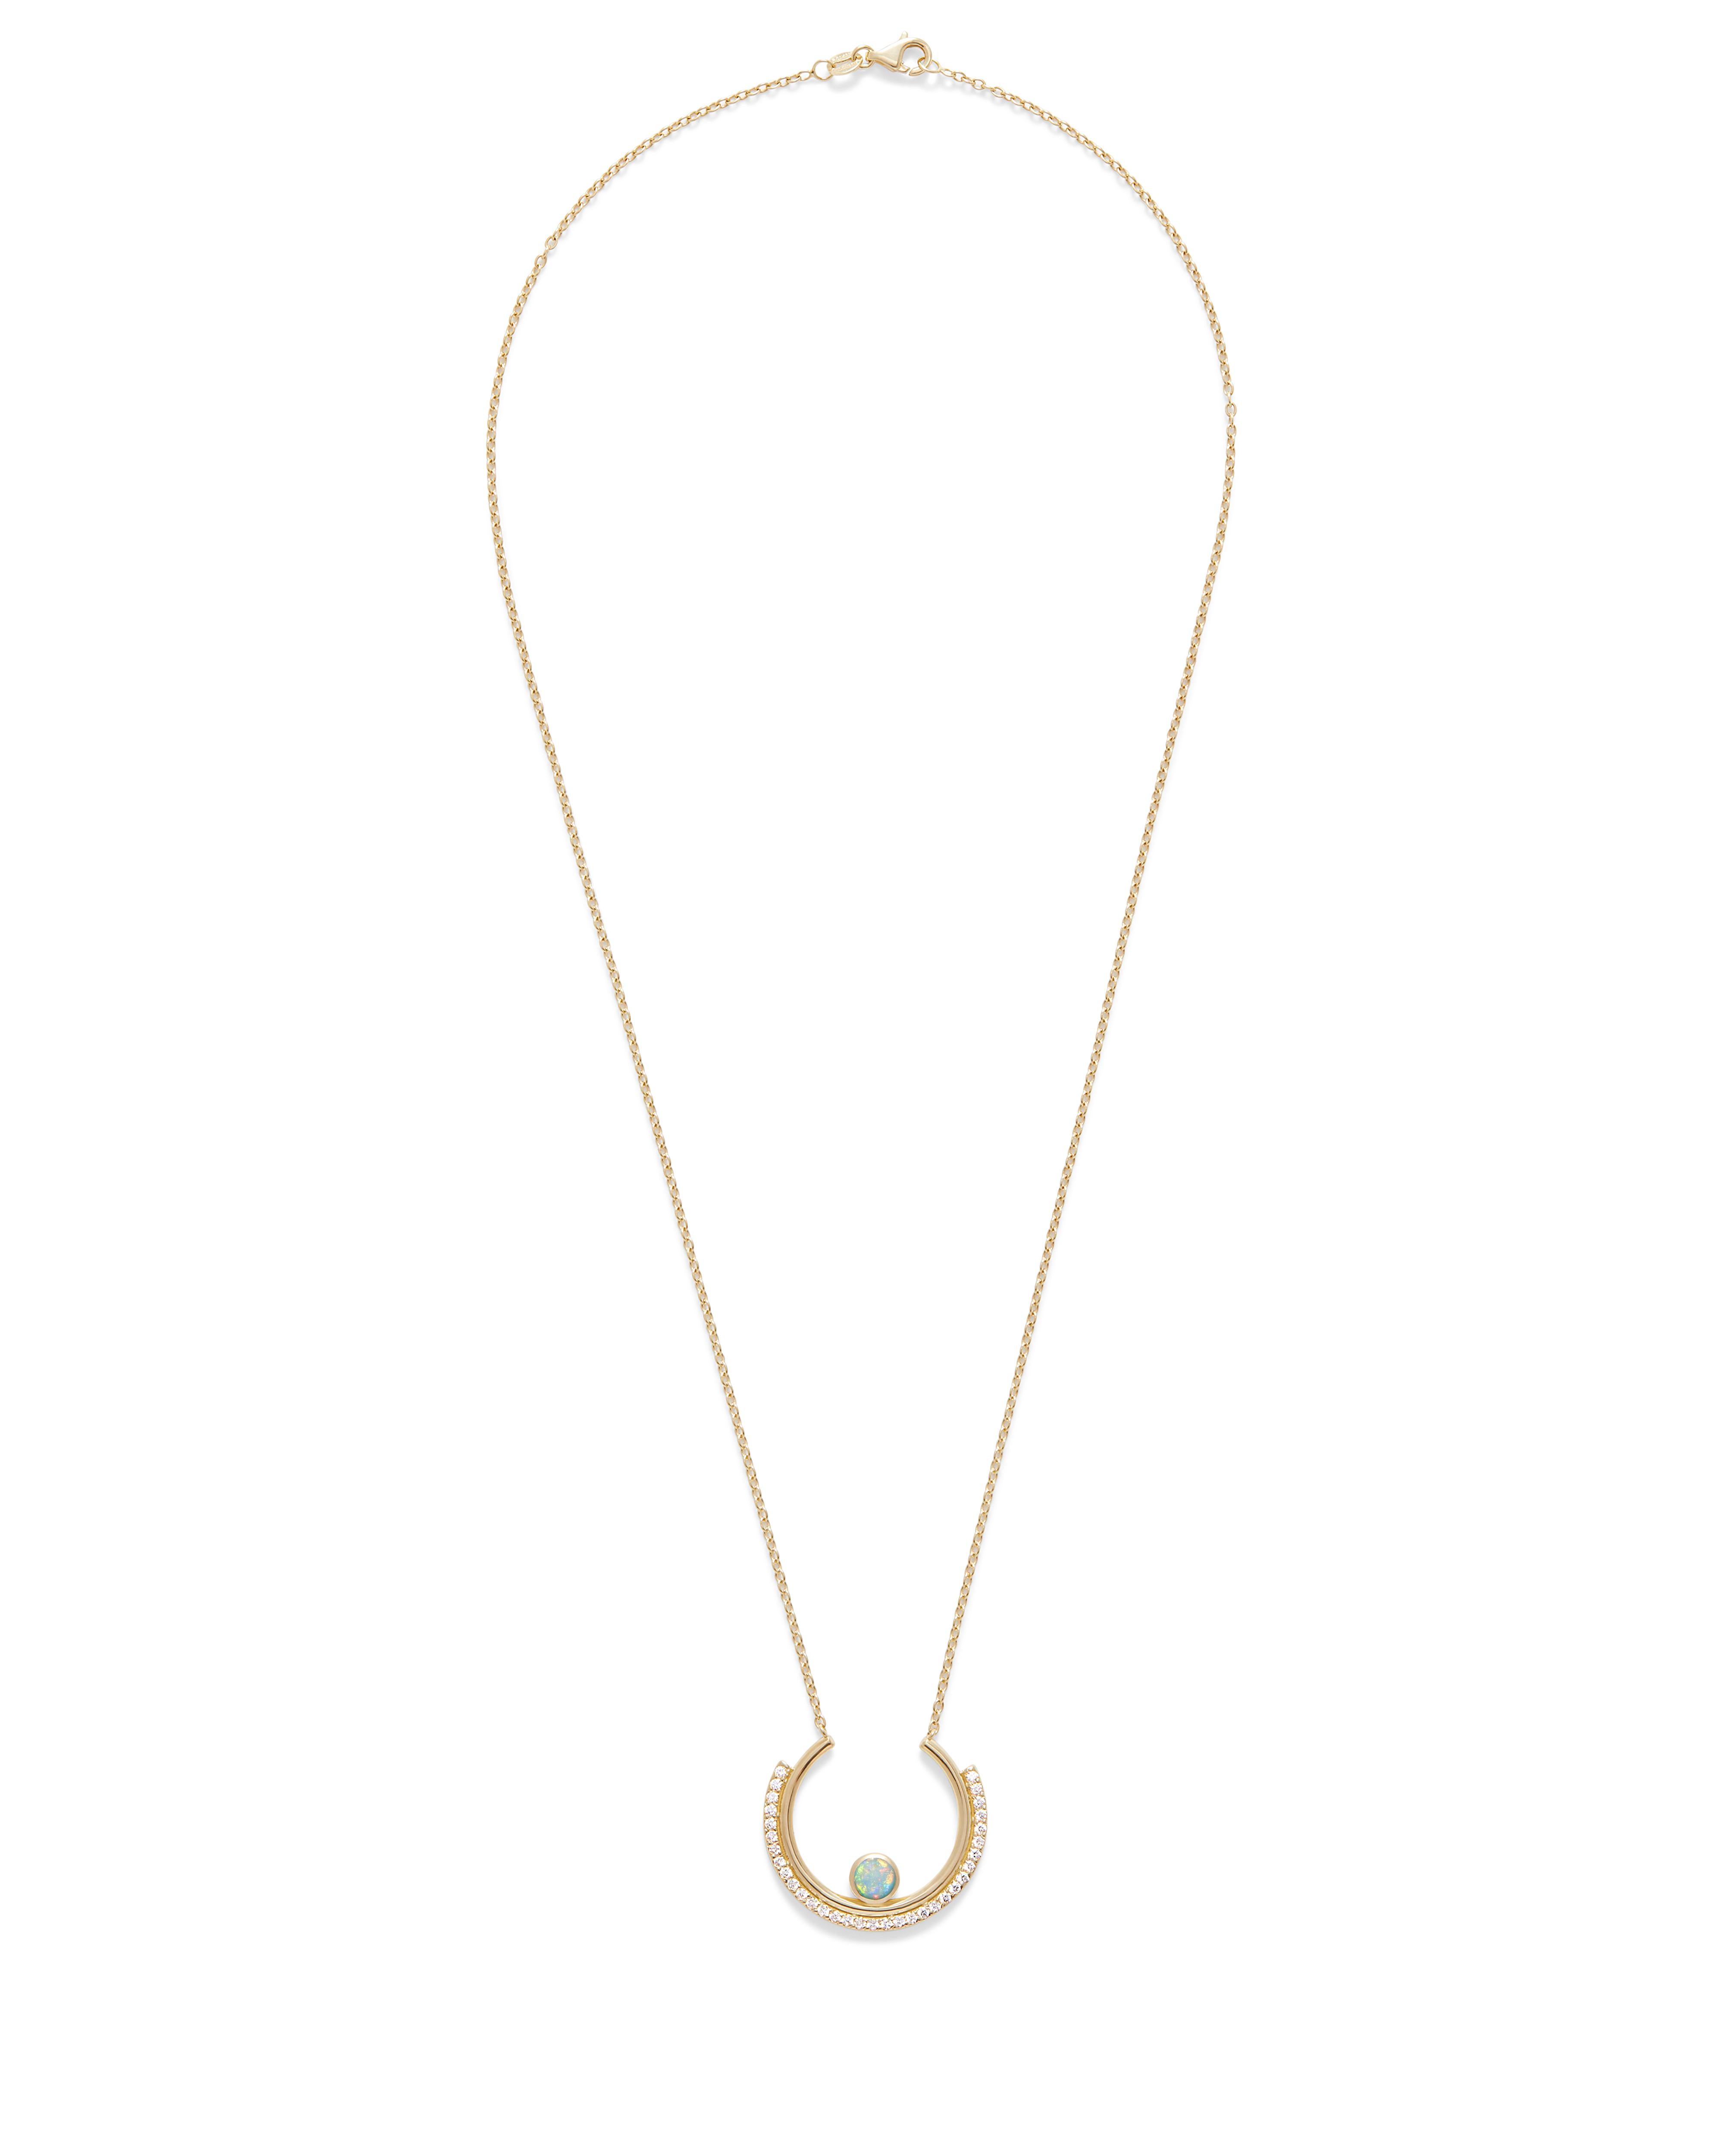 This modern pendant boasts a chic arc design complete with unique banded detailing. At the center sparkles a stunning opal, carefully set in a sleek bezel. The outer tier shimmers with dazzling pave diamonds. The necklace is made to a standard